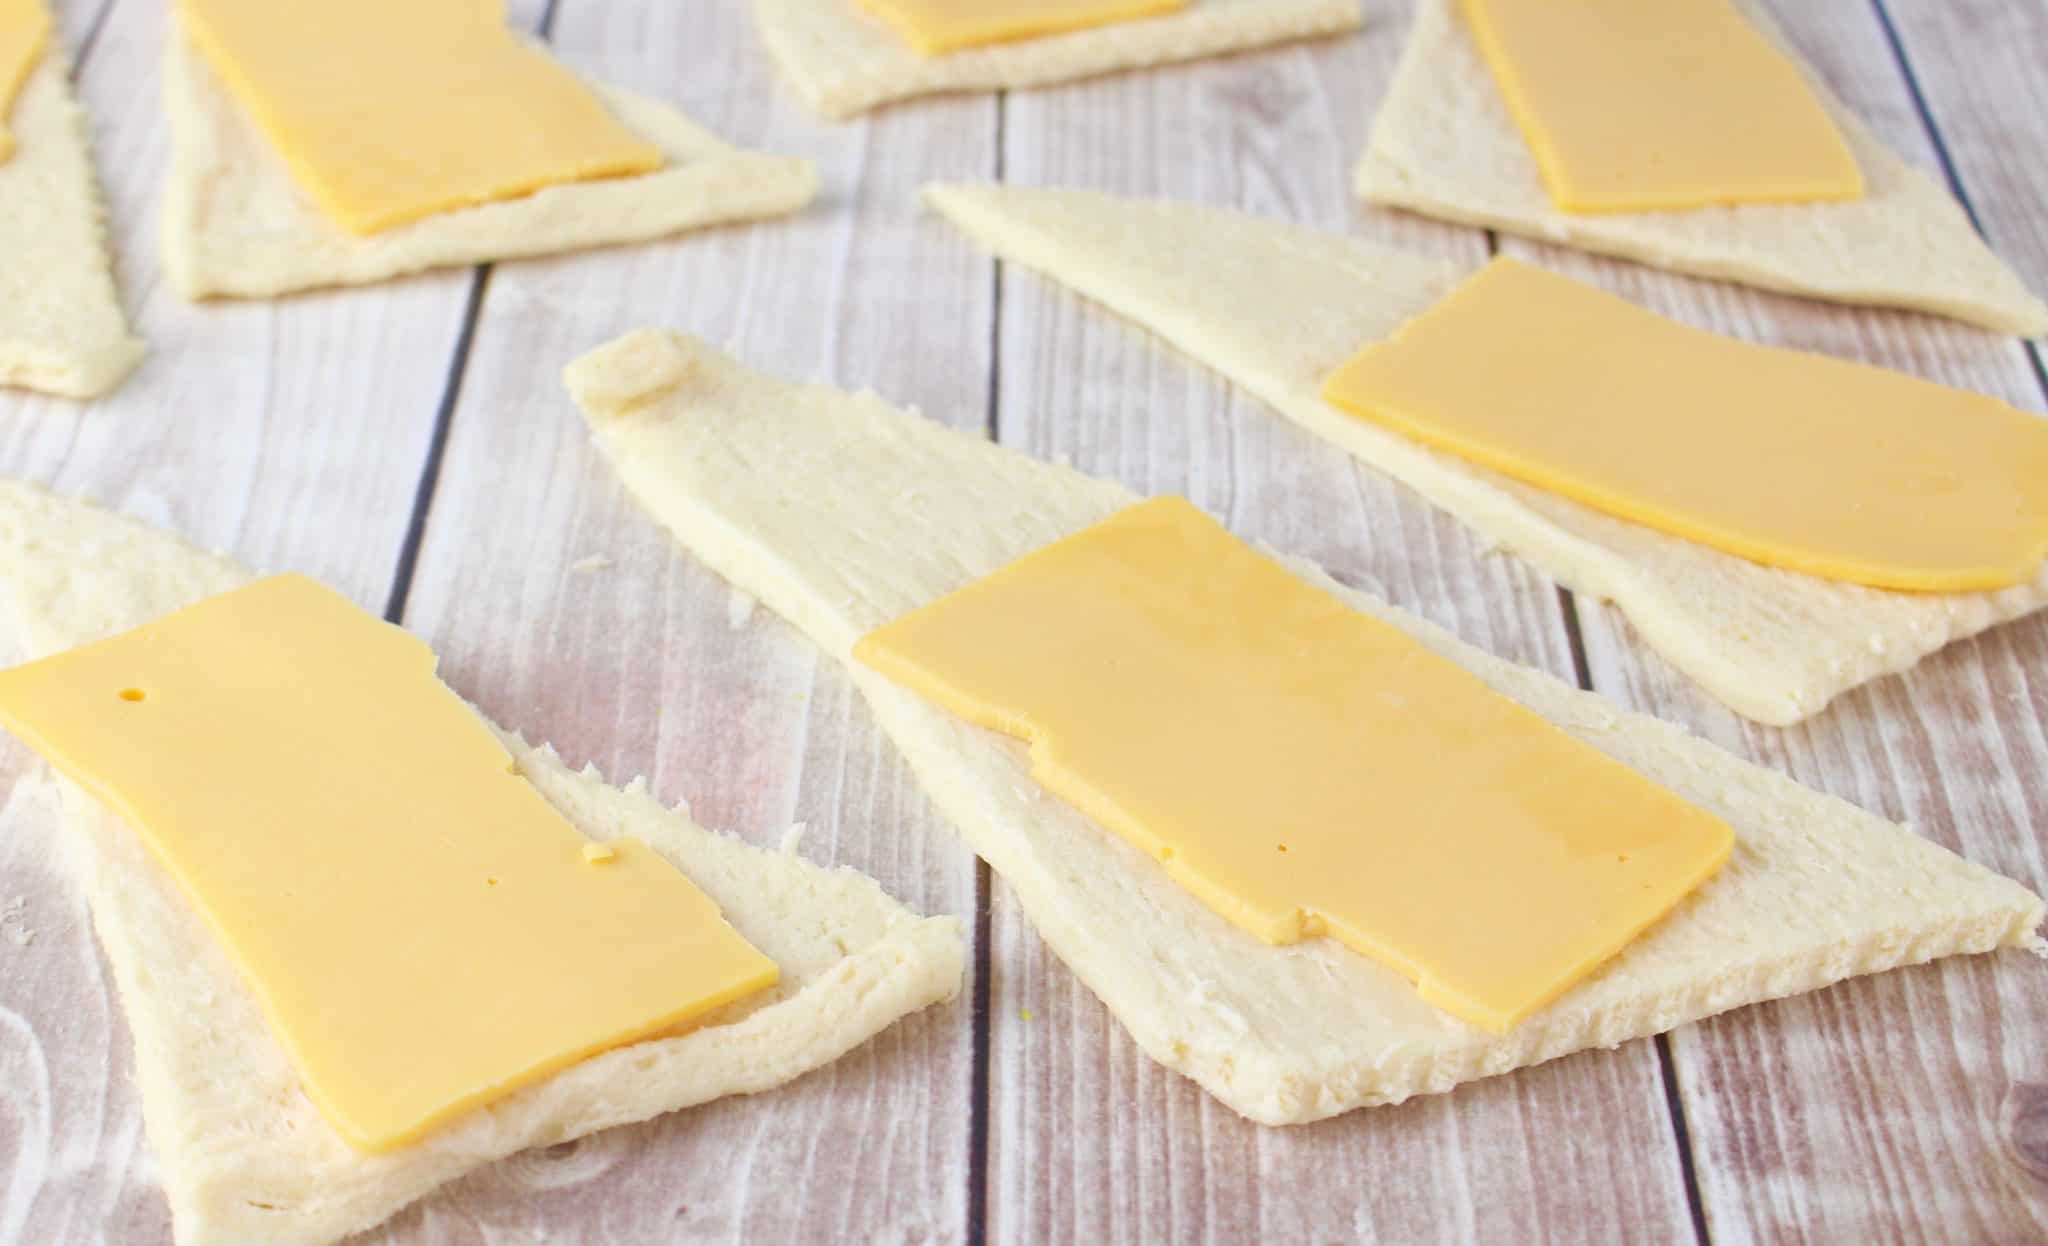 slices of American cheese place on crescent roll triangles.